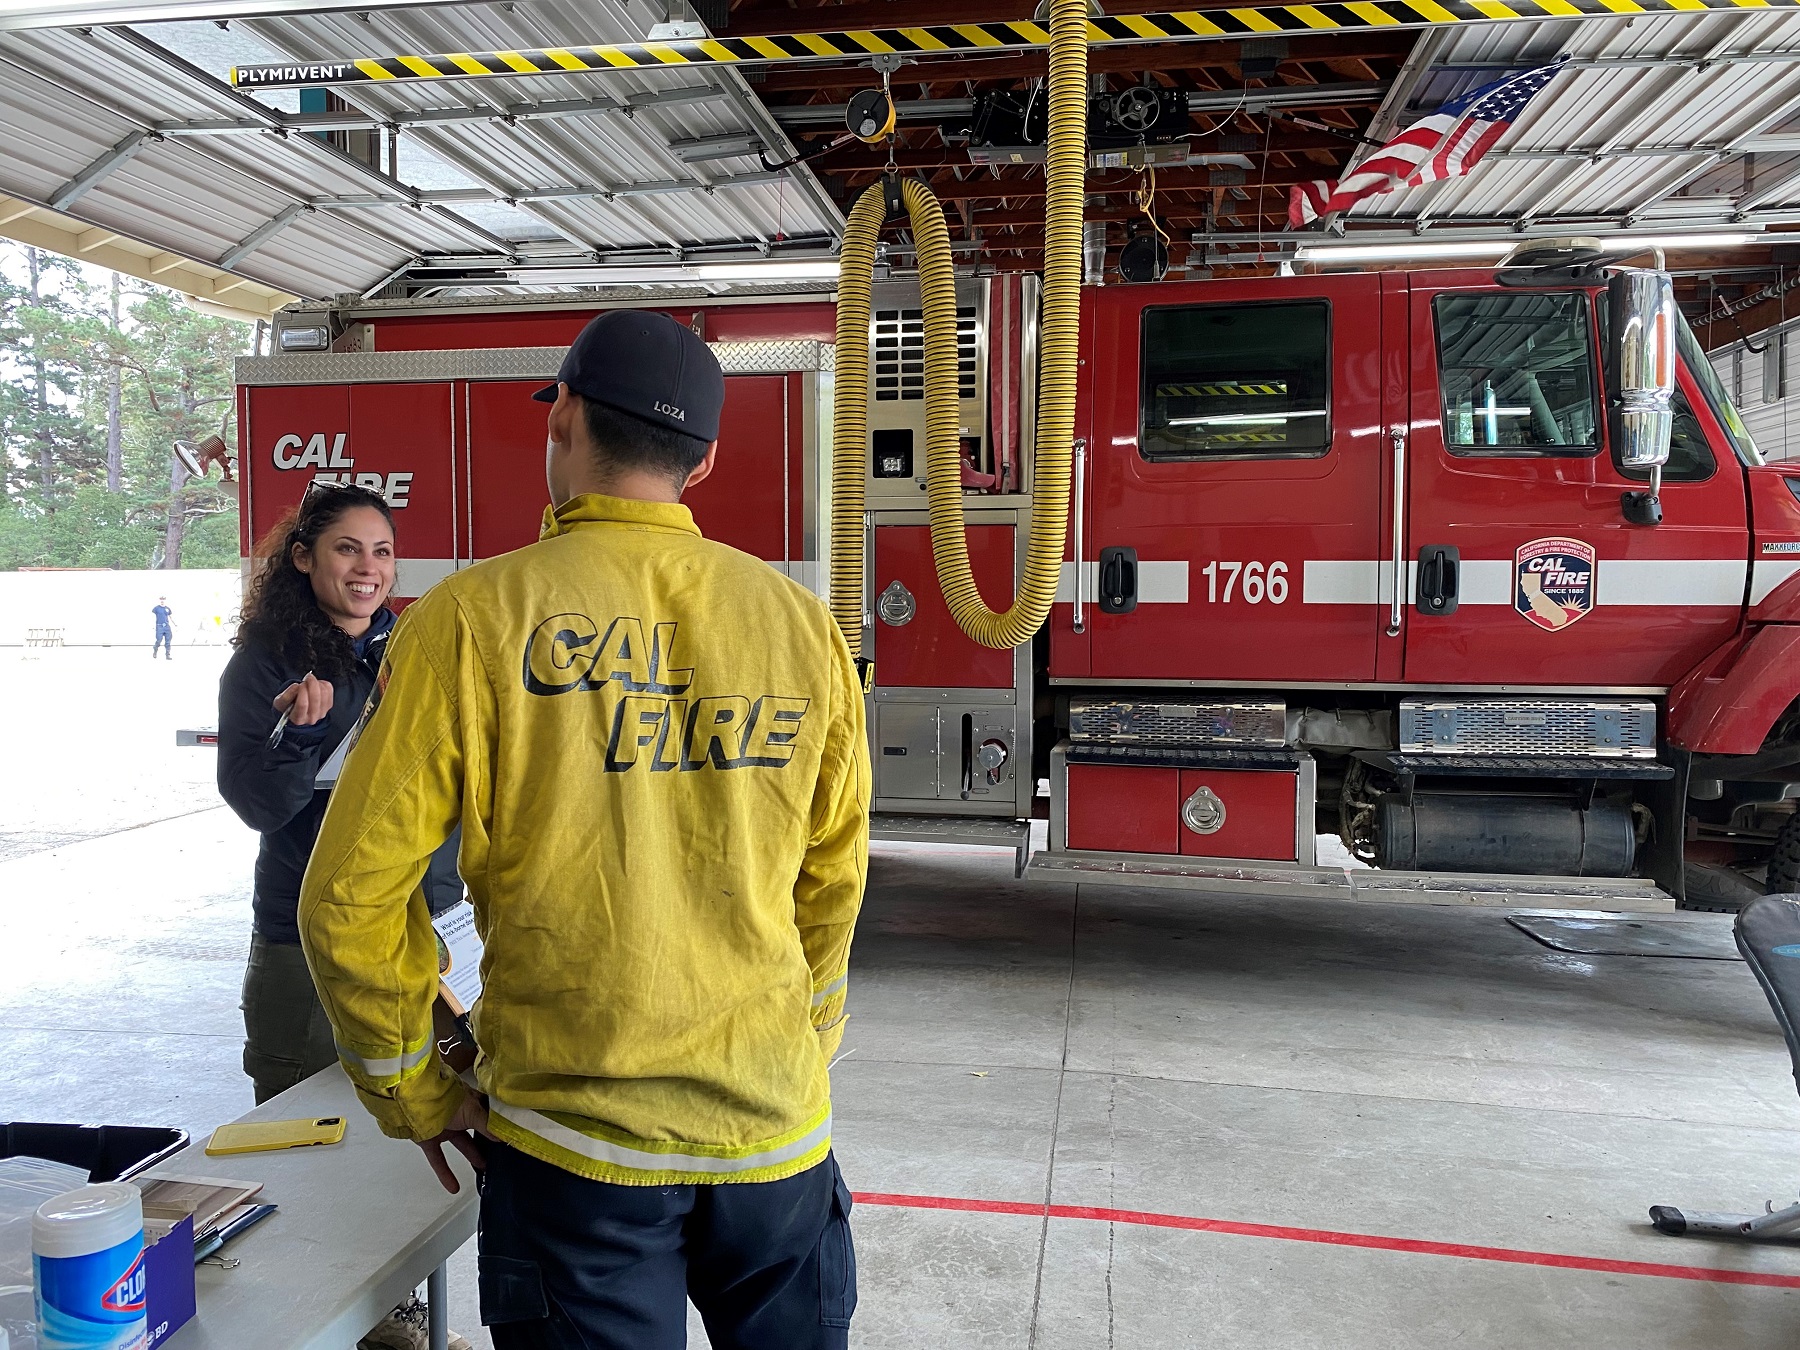 Woman interviewing CALFIRE employee about ticks in front of fire truck.